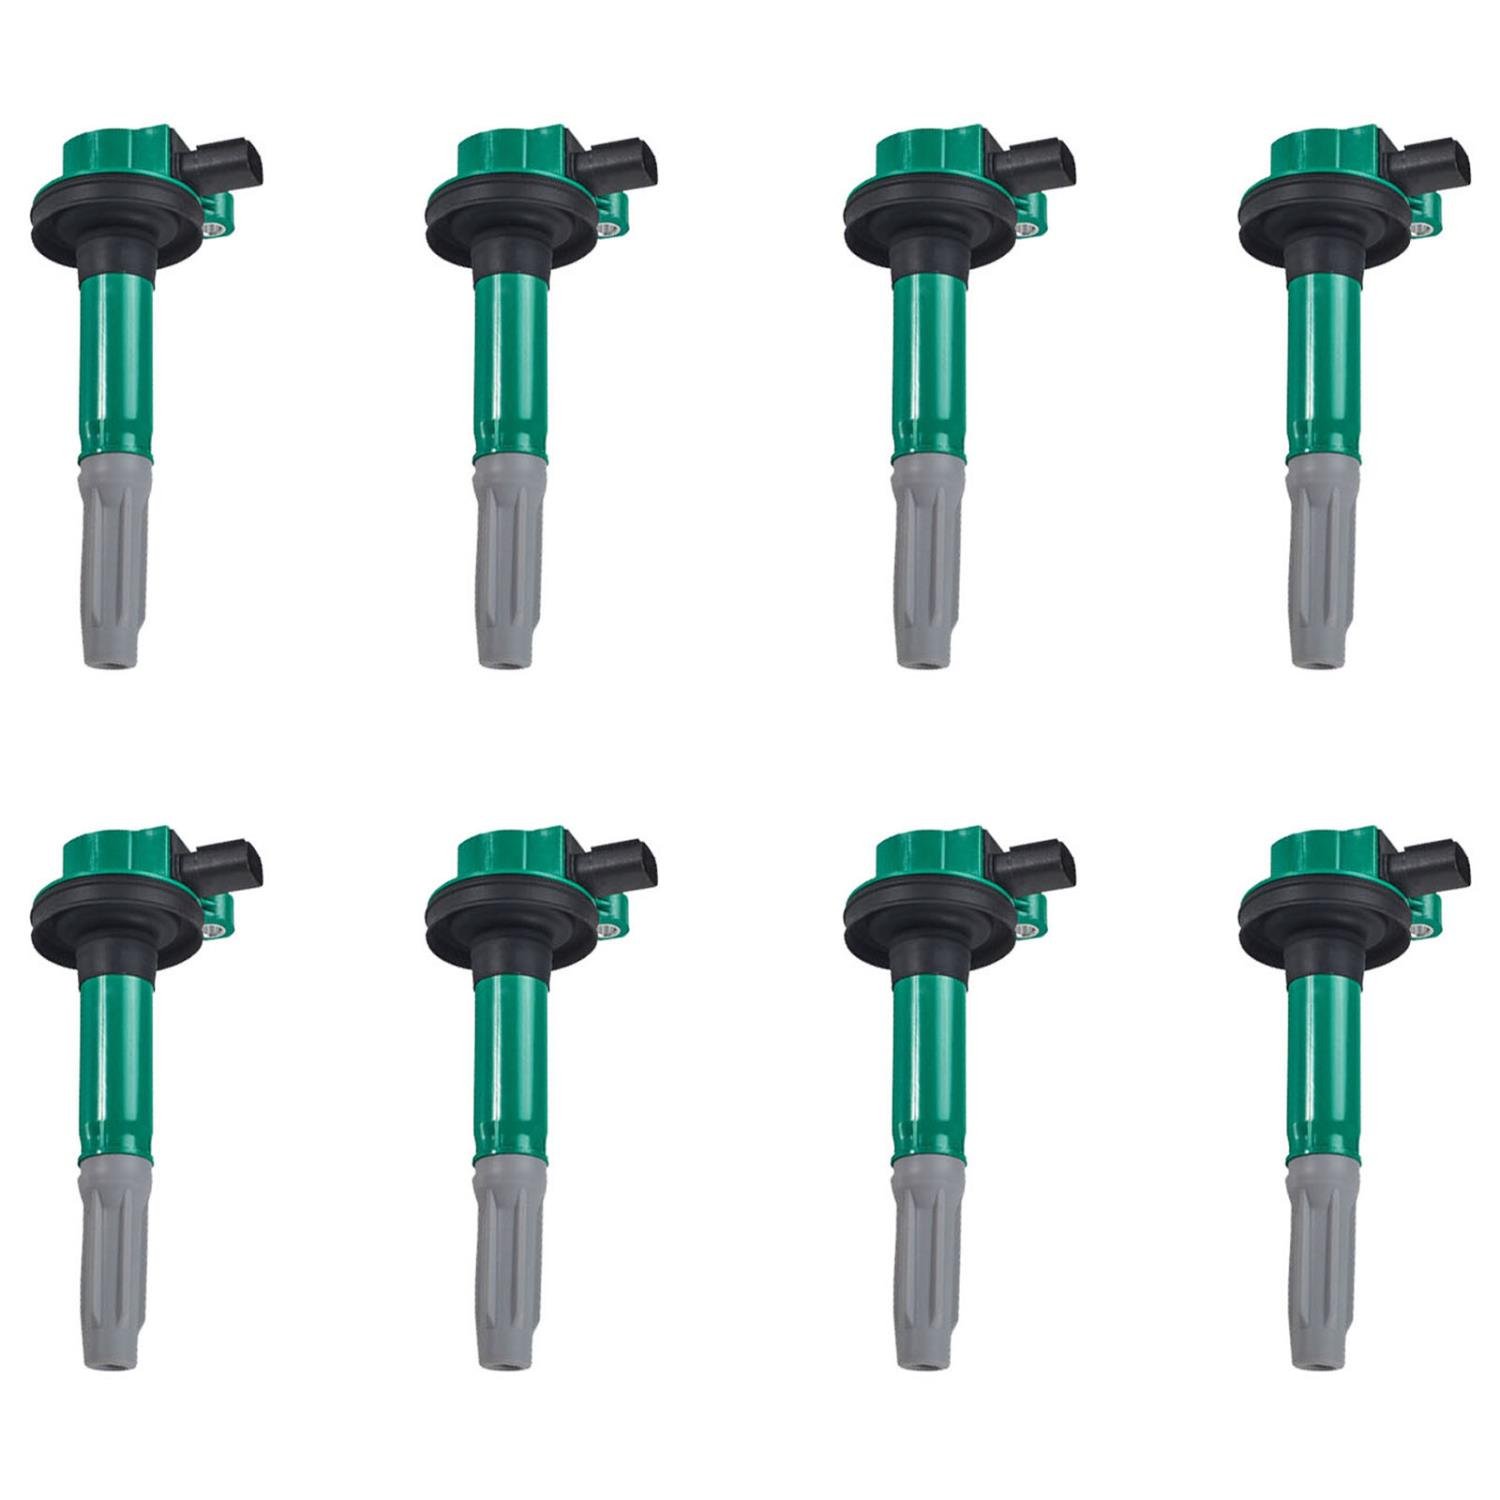 High-Performance Ignition Coils for Ford F-150 5.0L [Green]